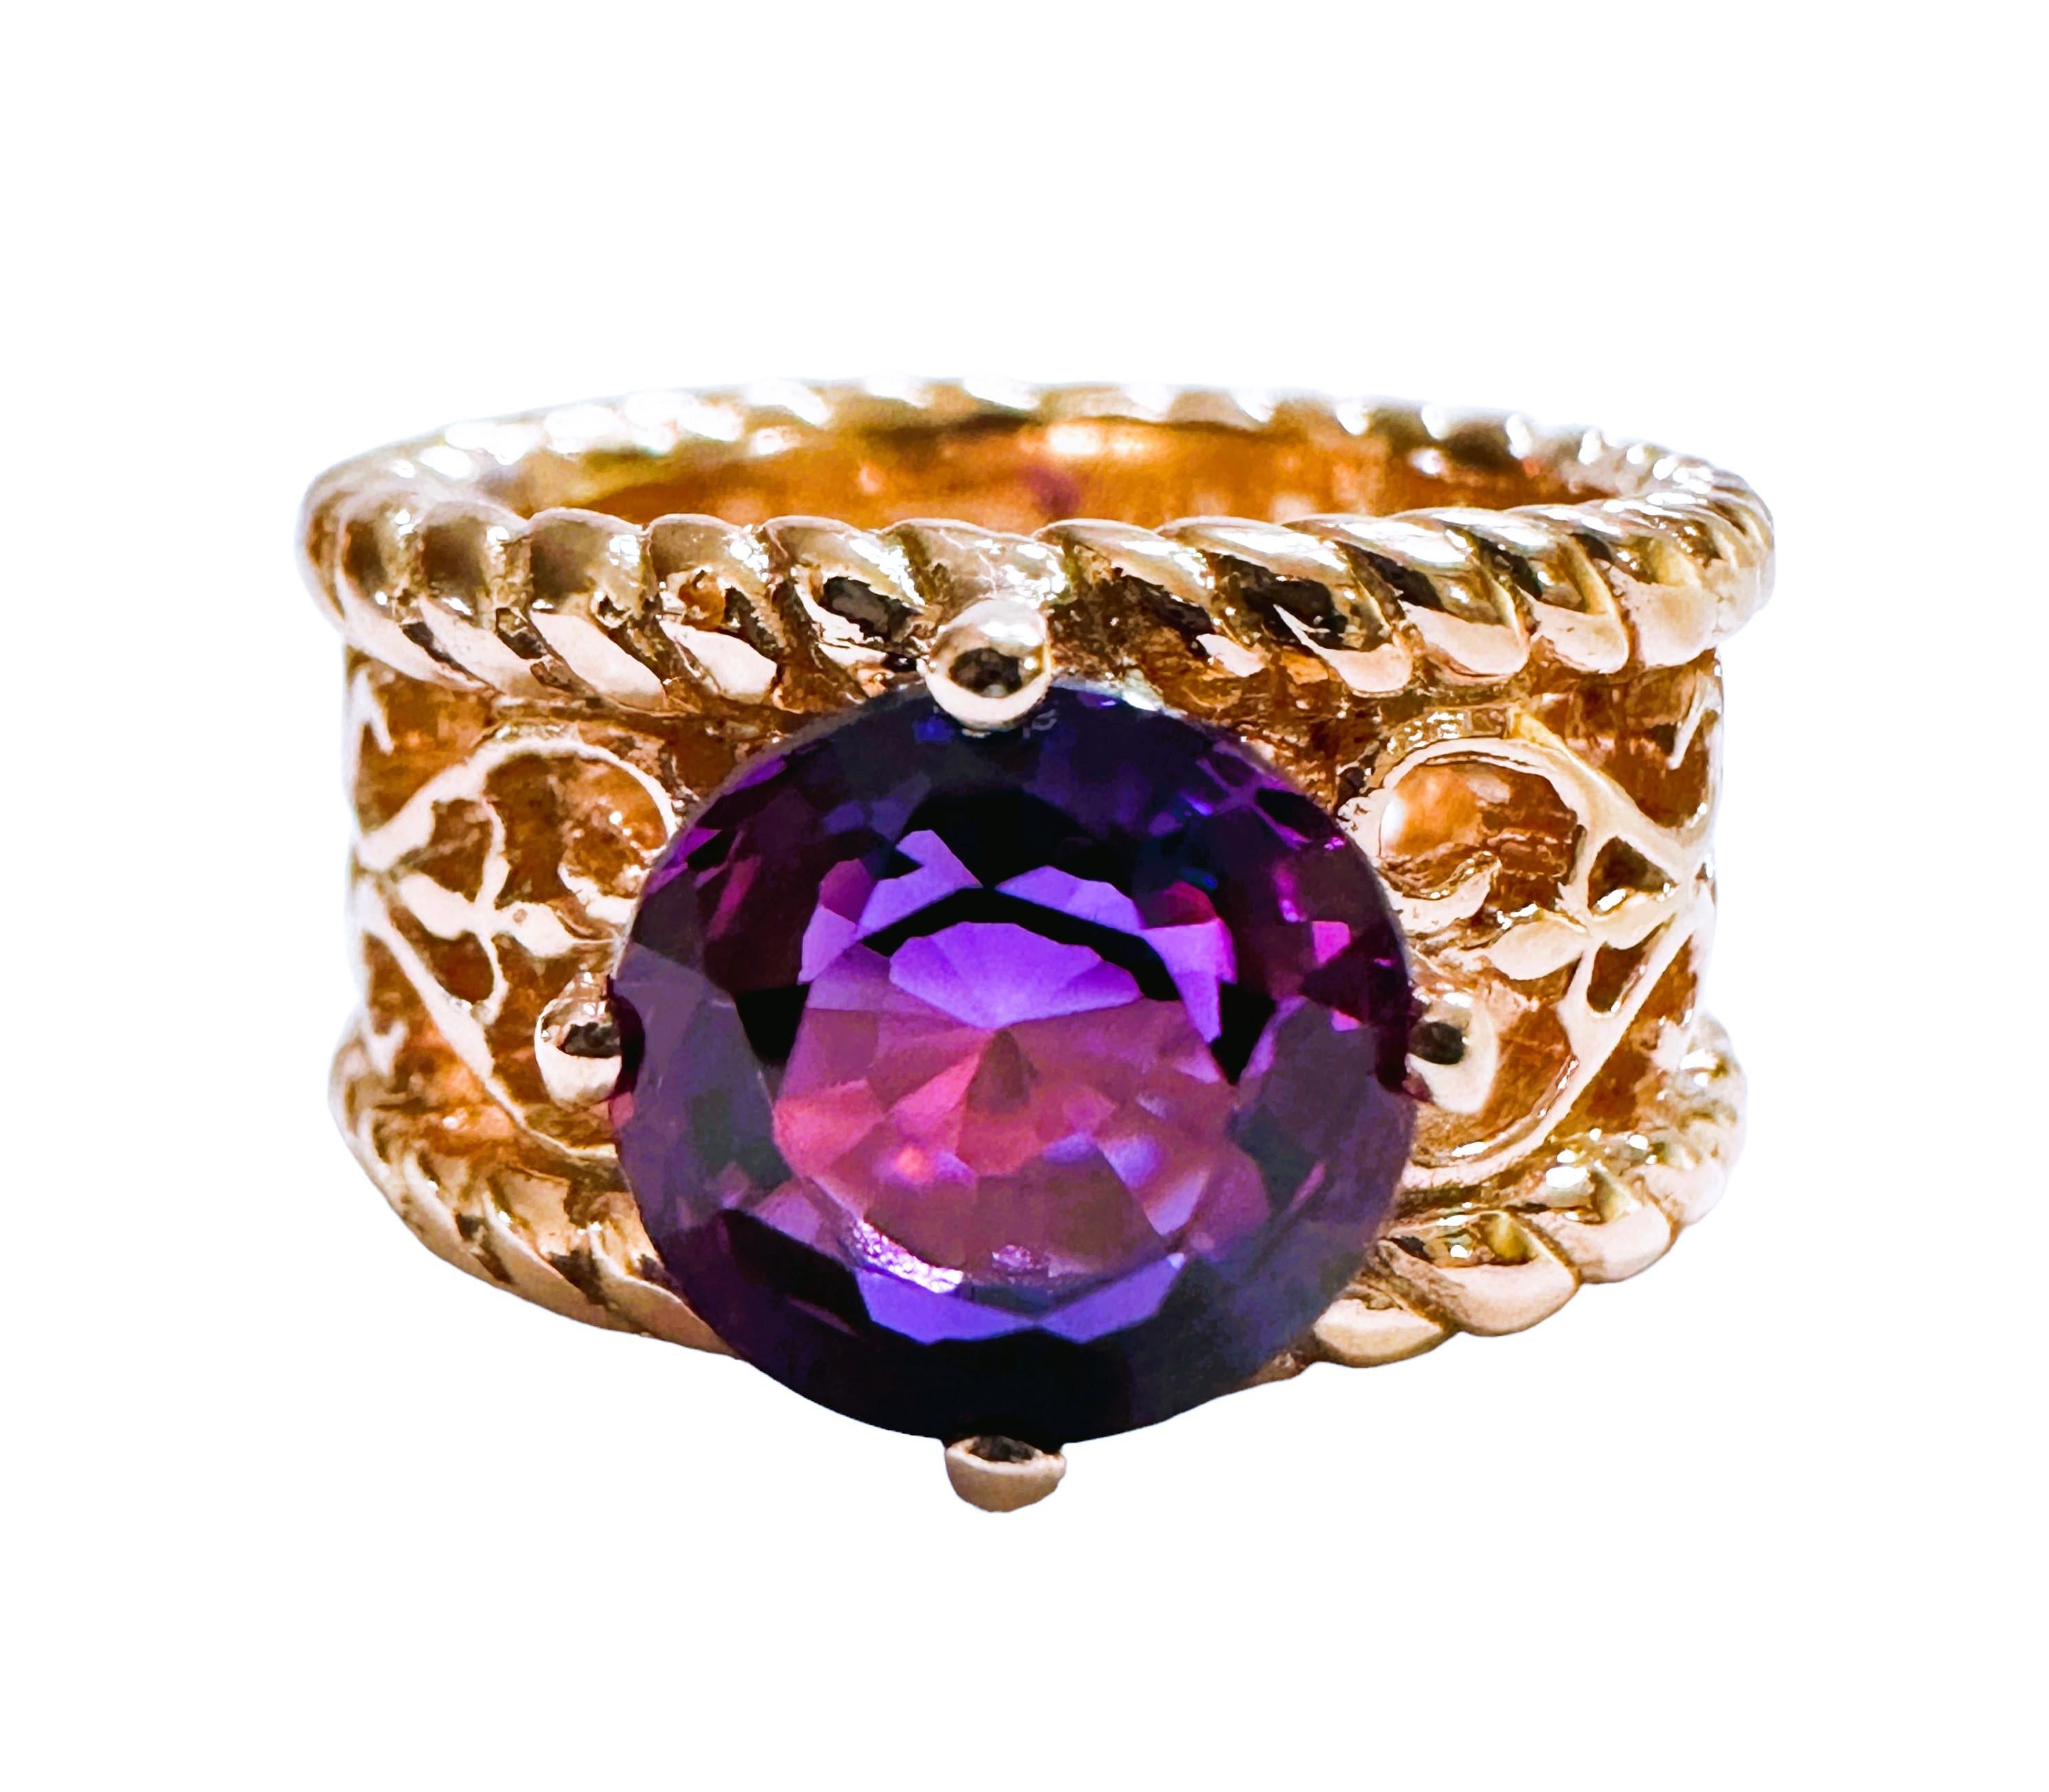 This is just a beautiful gemstone. This beautiful stone has pinks, blues and purples in it.  It's just spectacular.  The ring is a size 5.75.  It was mined in Africa and is just exquisite.   A very high quality stone. It is a round cut stone and is